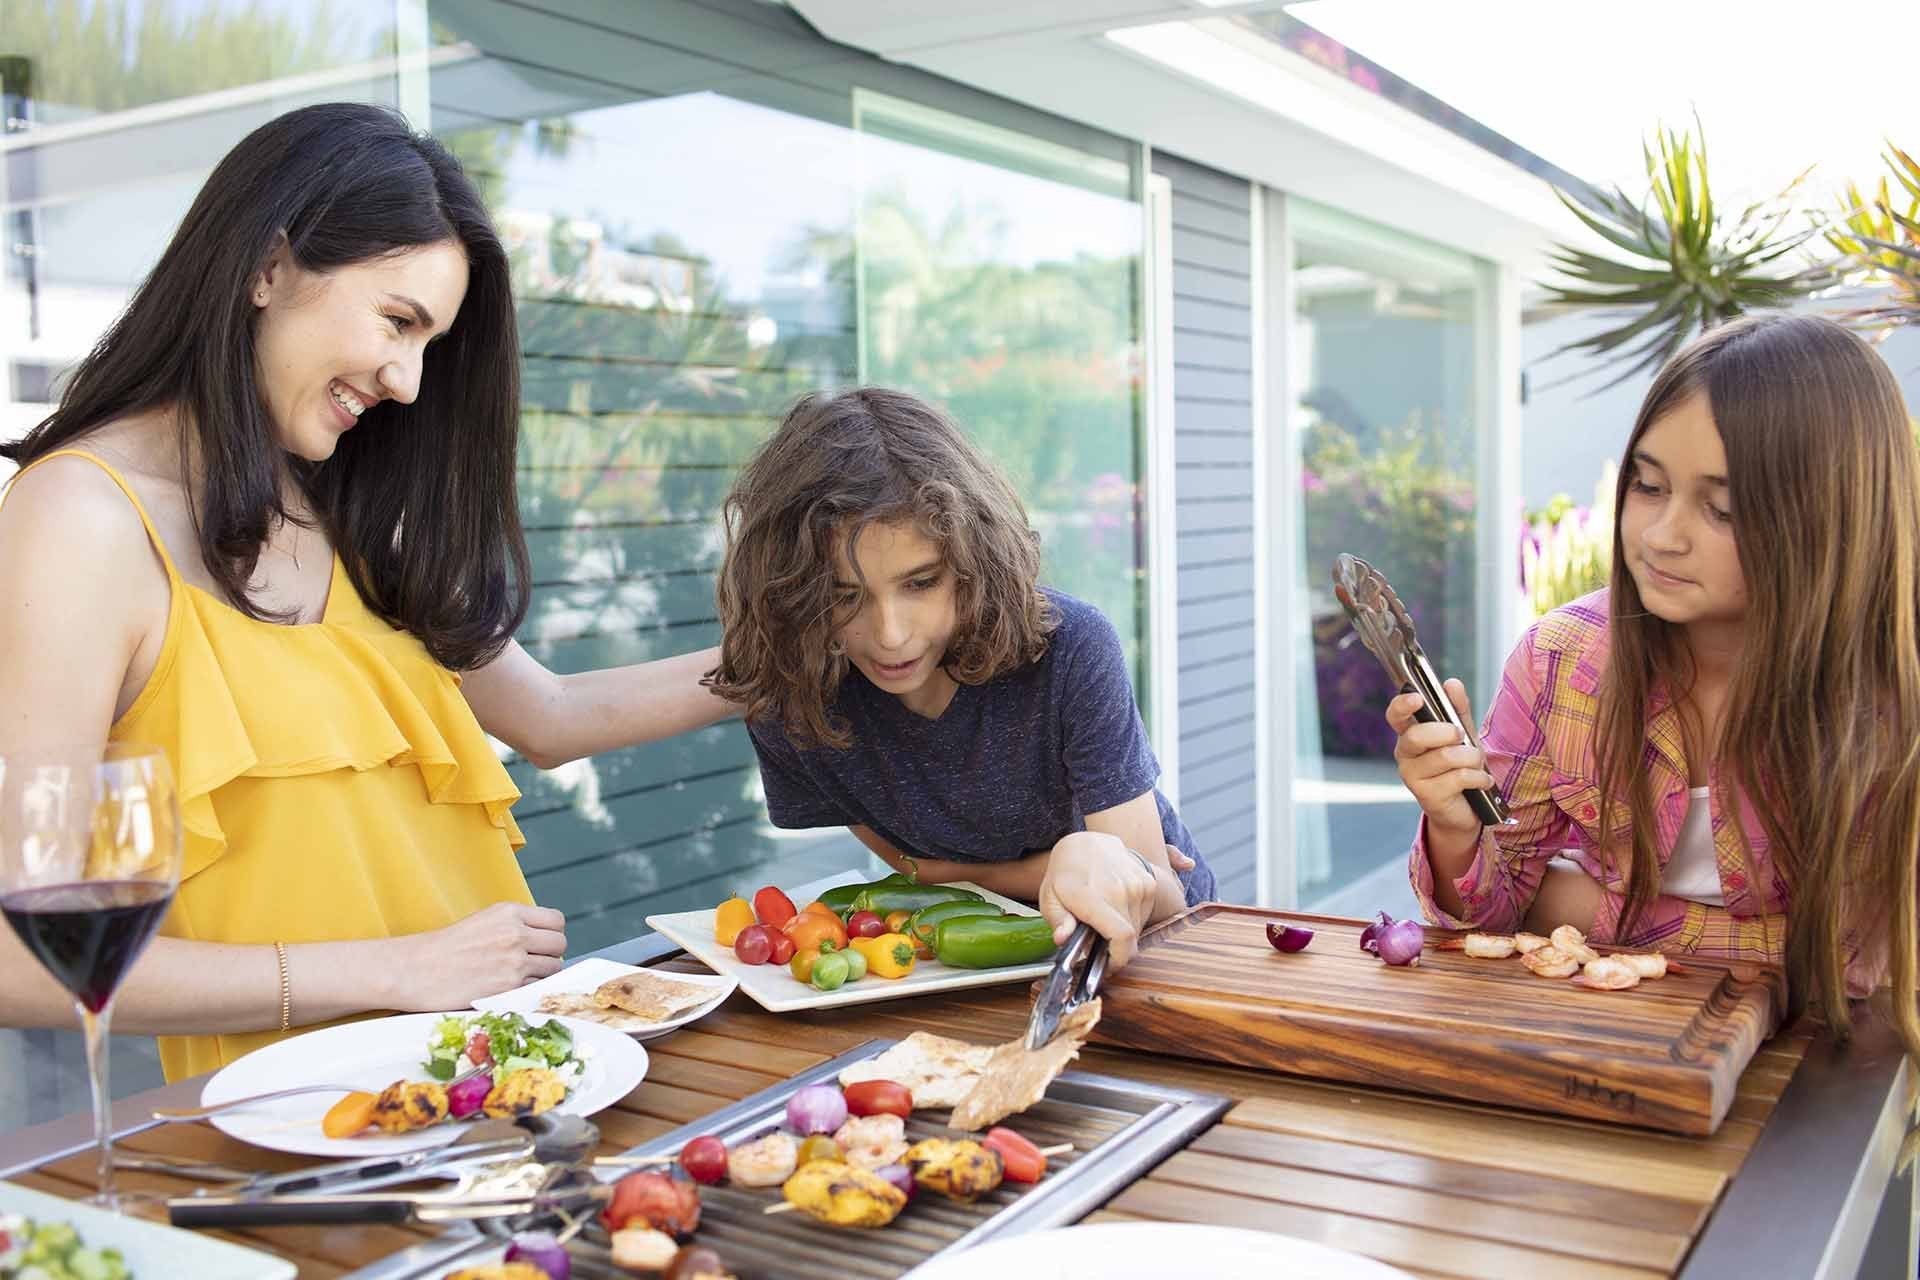 Dinnertime Fun - 5 Ways to Engage Your Kids at the Table